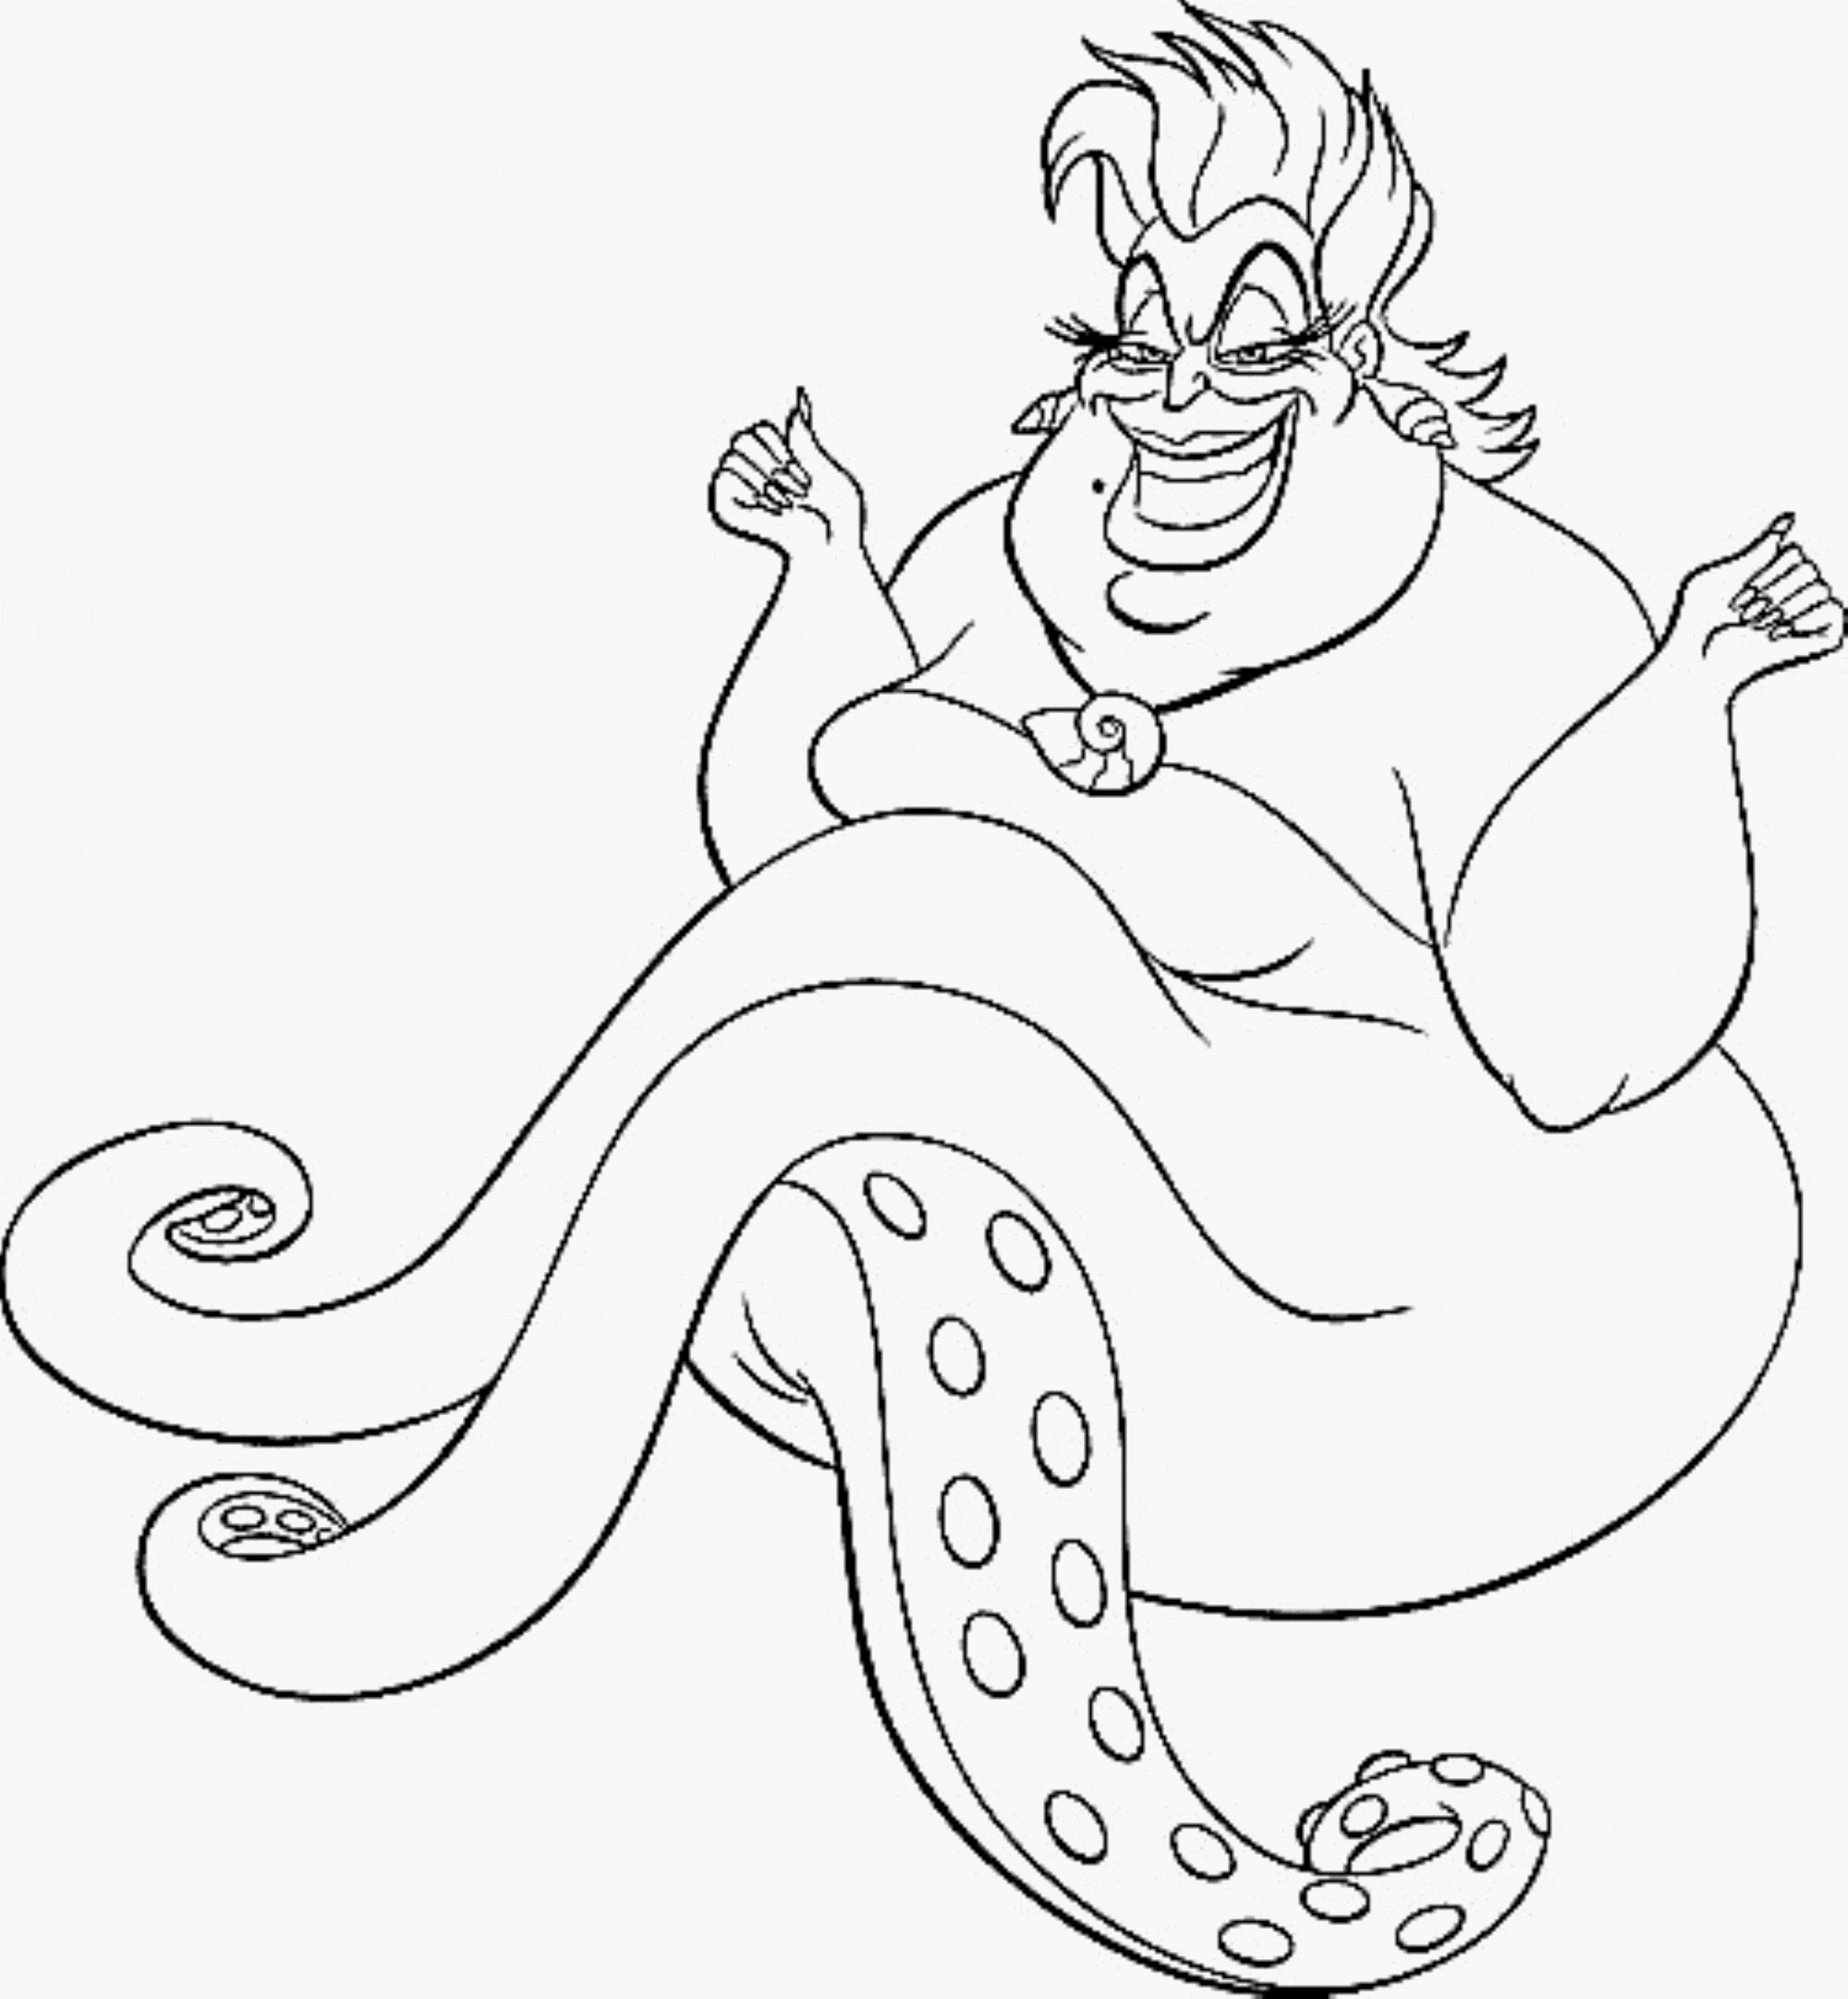 ursula coloring pages print download find the suitable little mermaid ursula coloring pages 